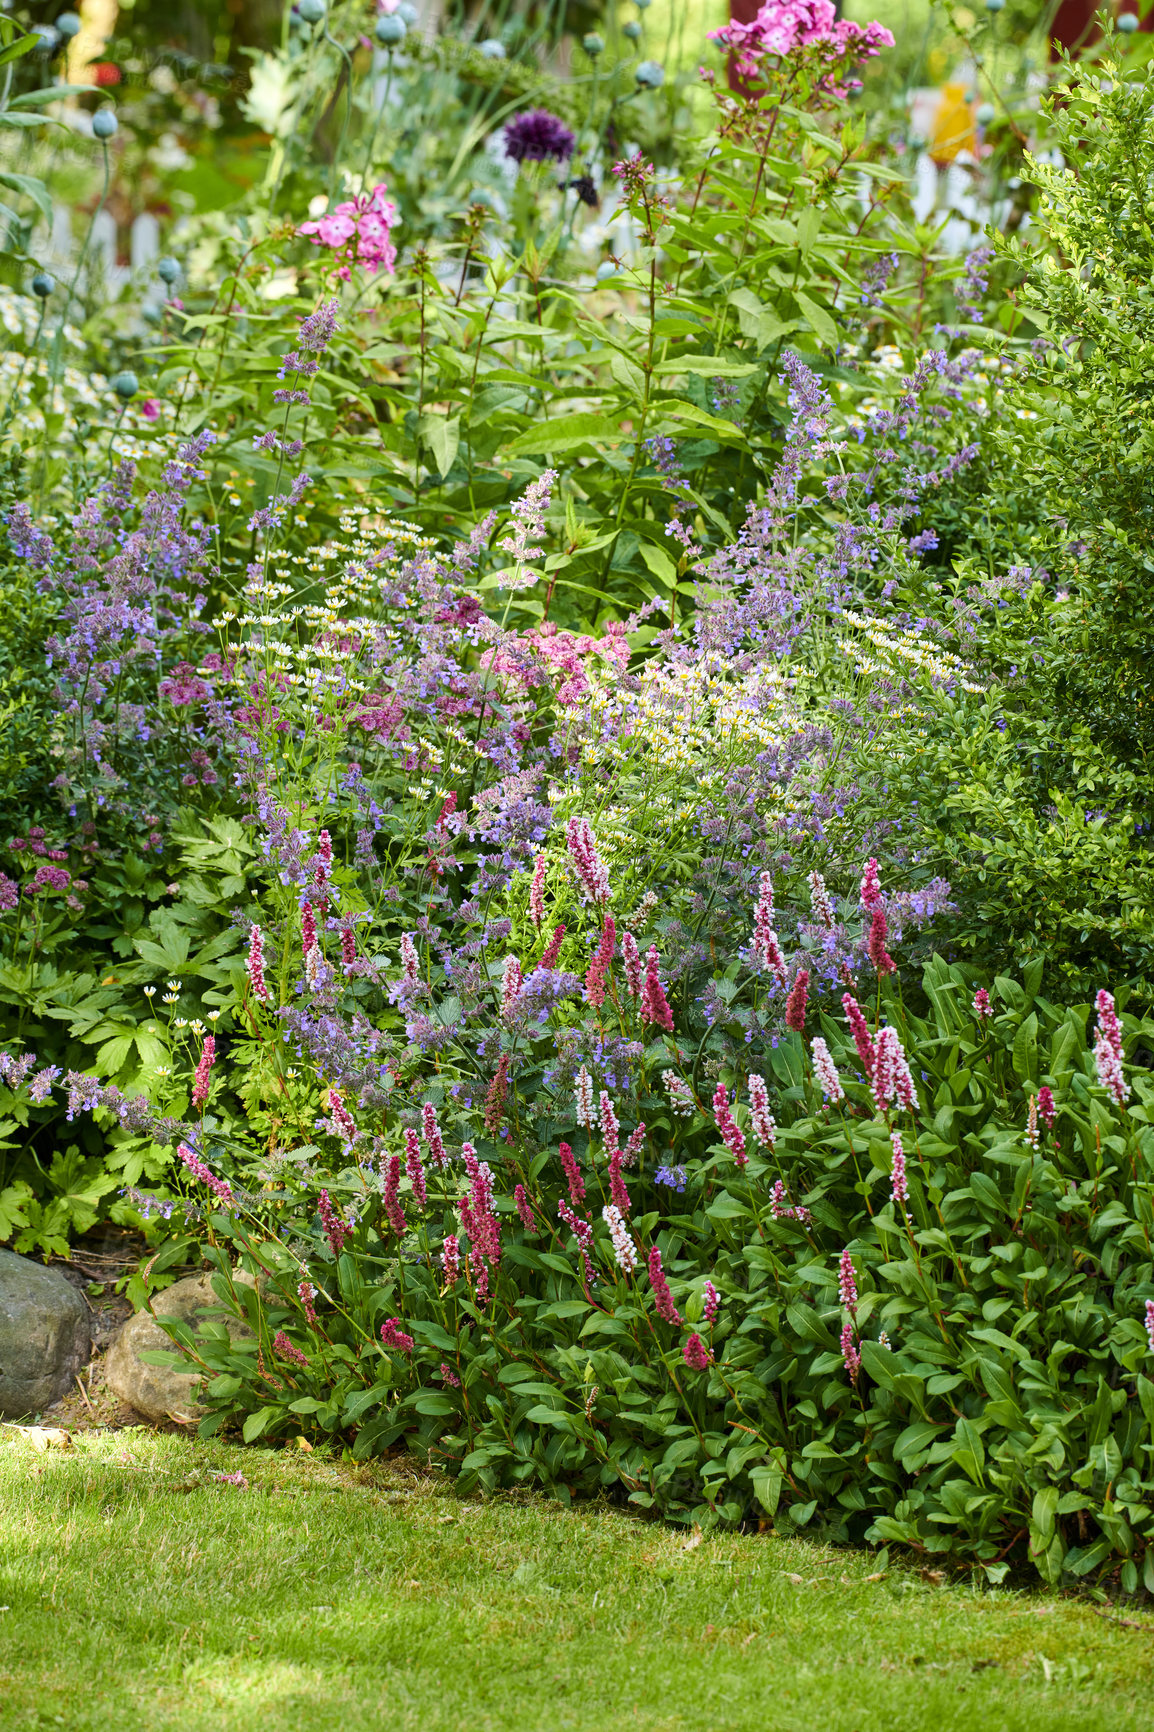 Buy stock photo Colorful garden with different plants and flowers in the sun. Bright purple catmint or nepeta growing alongside lady's thumb or redshank in a park. Vibrant nature with views of lush foliage in spring